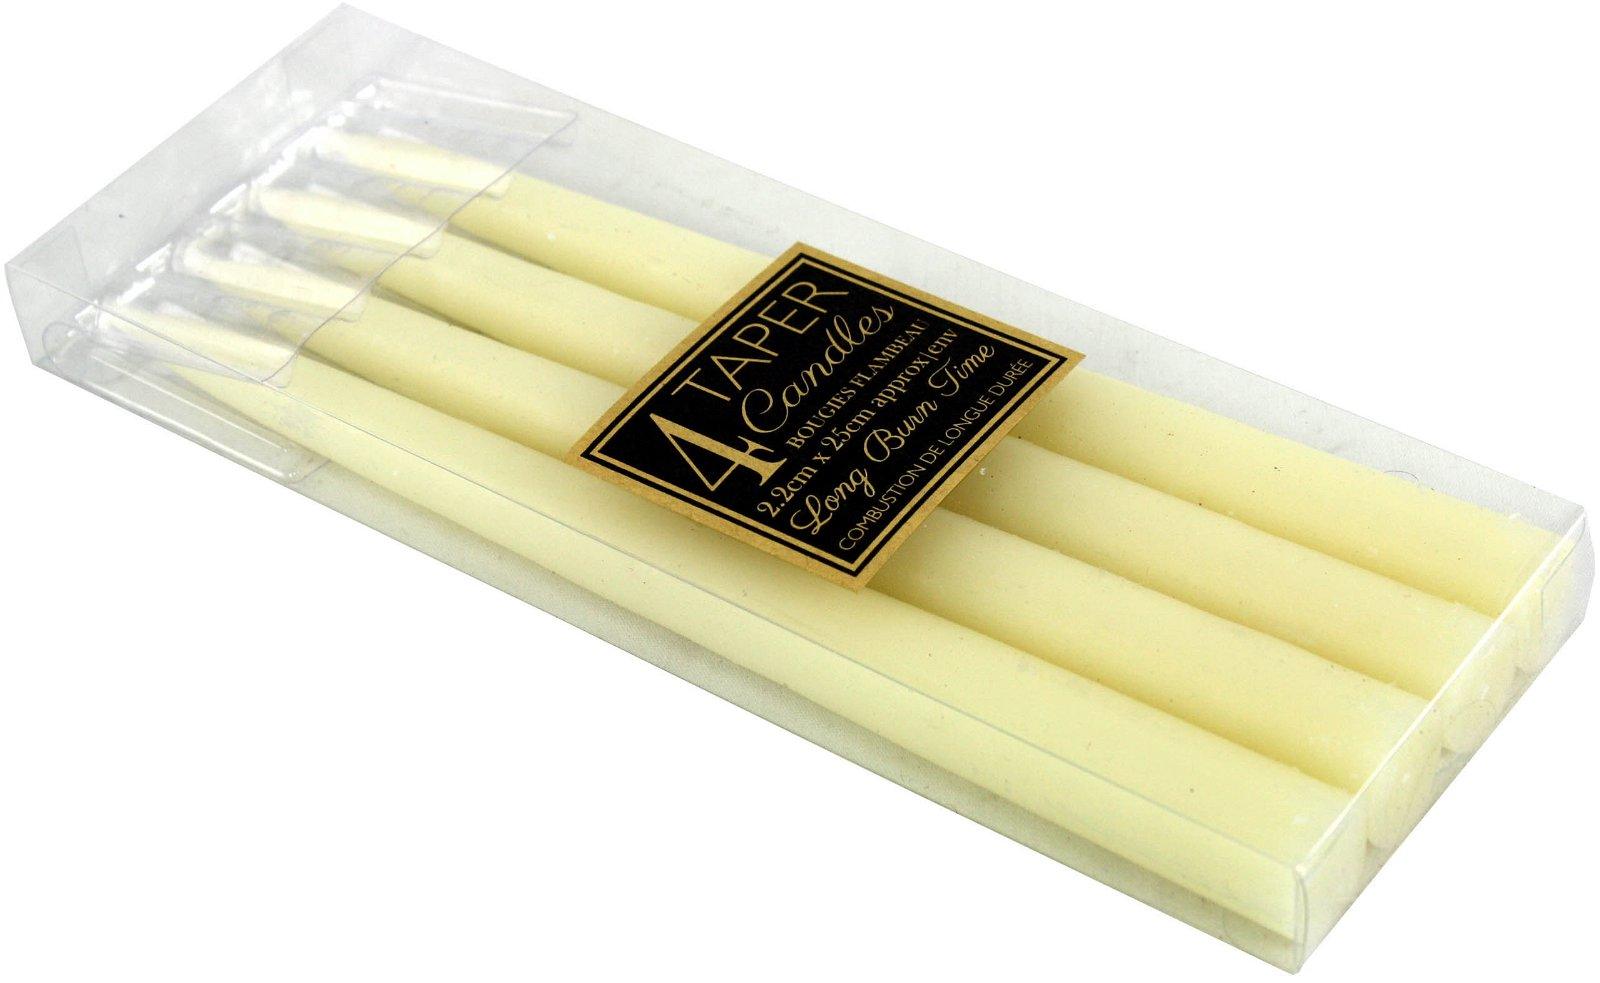 View Set Of 4 Ivory Taper Candles information